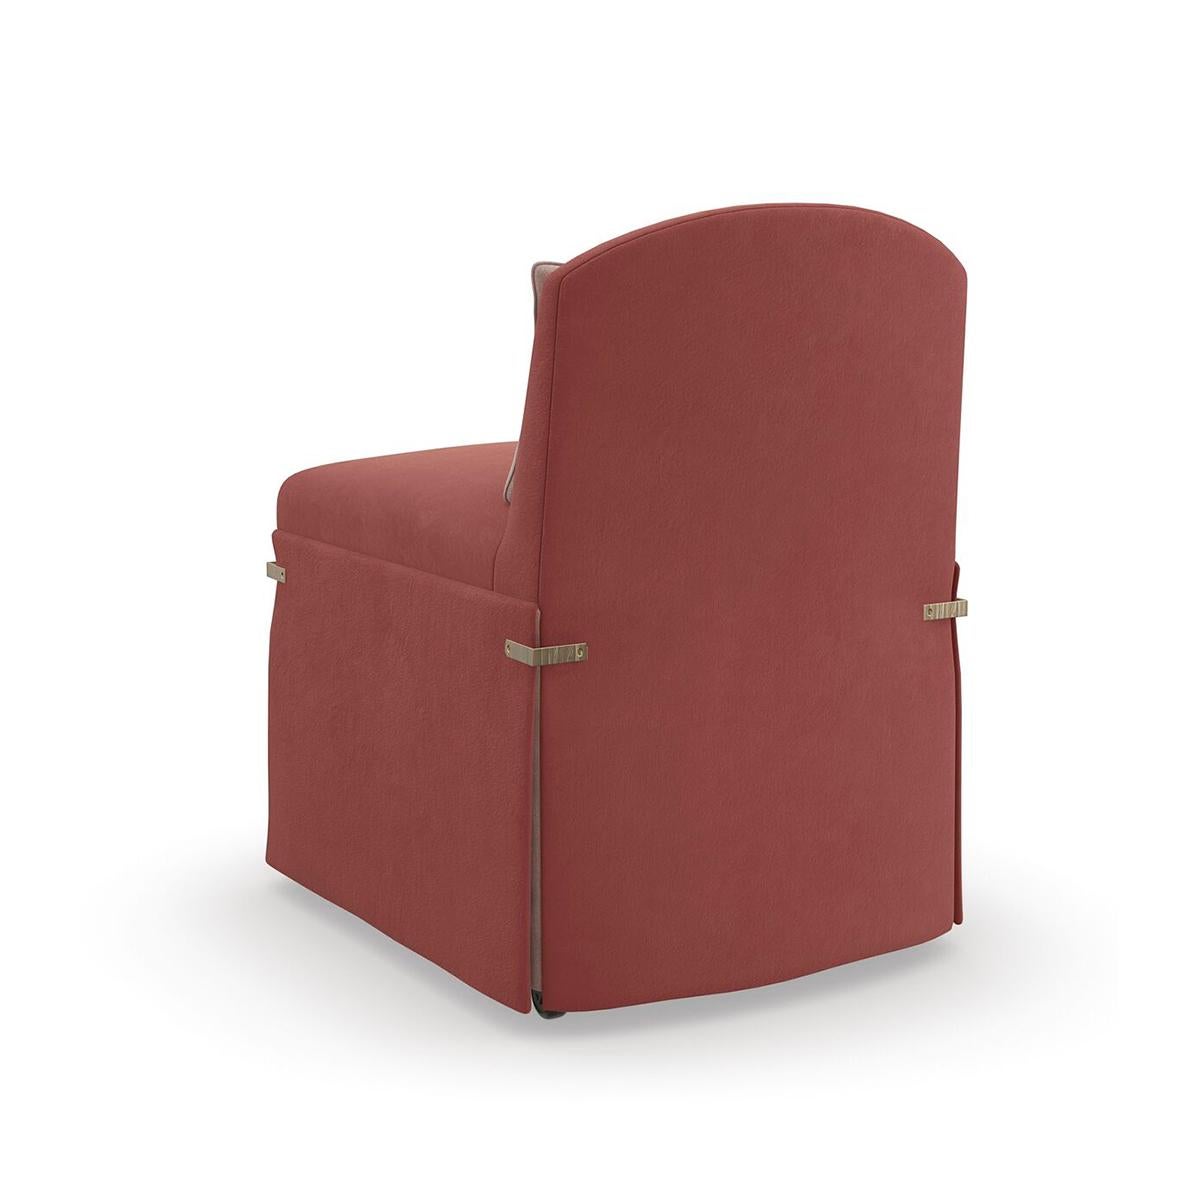 This petite seat calls to mind the exquisite detail and drape of a bustle dress, fashionable during the late 1880s. Its elegant silhouette features a low camelback and dressmaker skirt in a dusty rose fabric, cinched together by textured metal